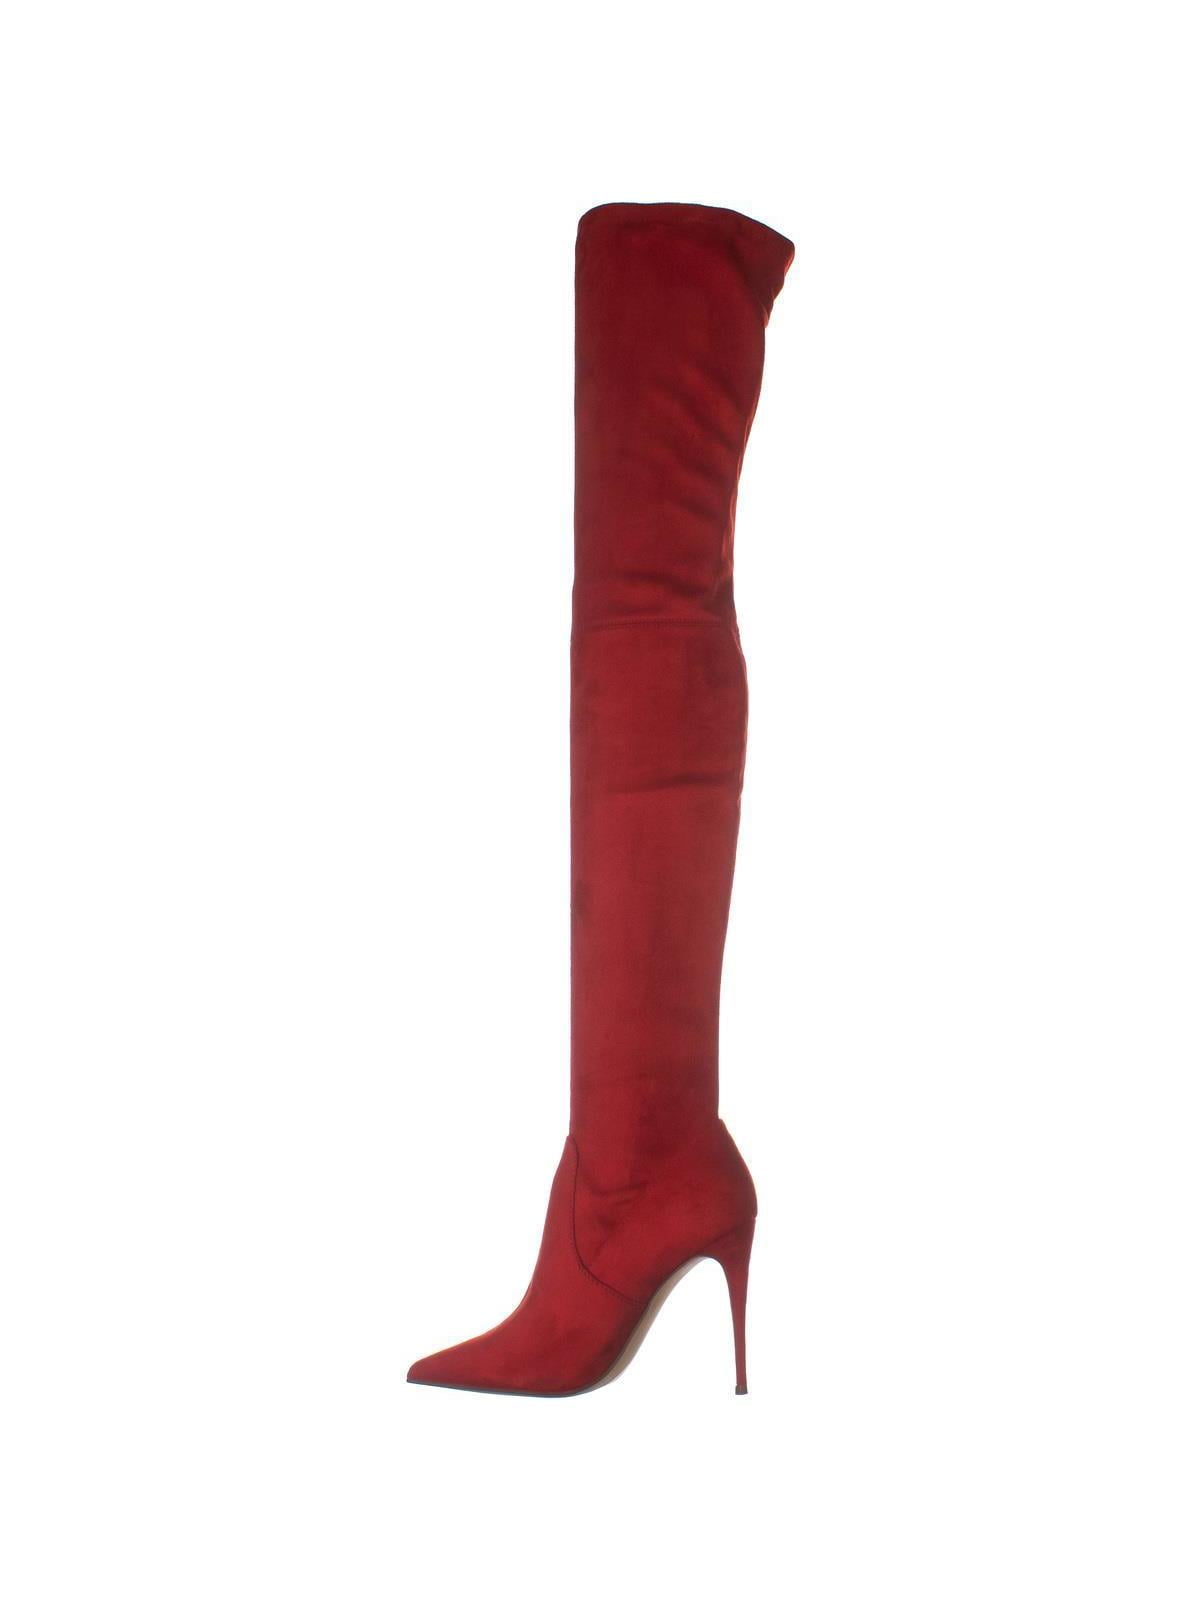 steve madden dominique red boots